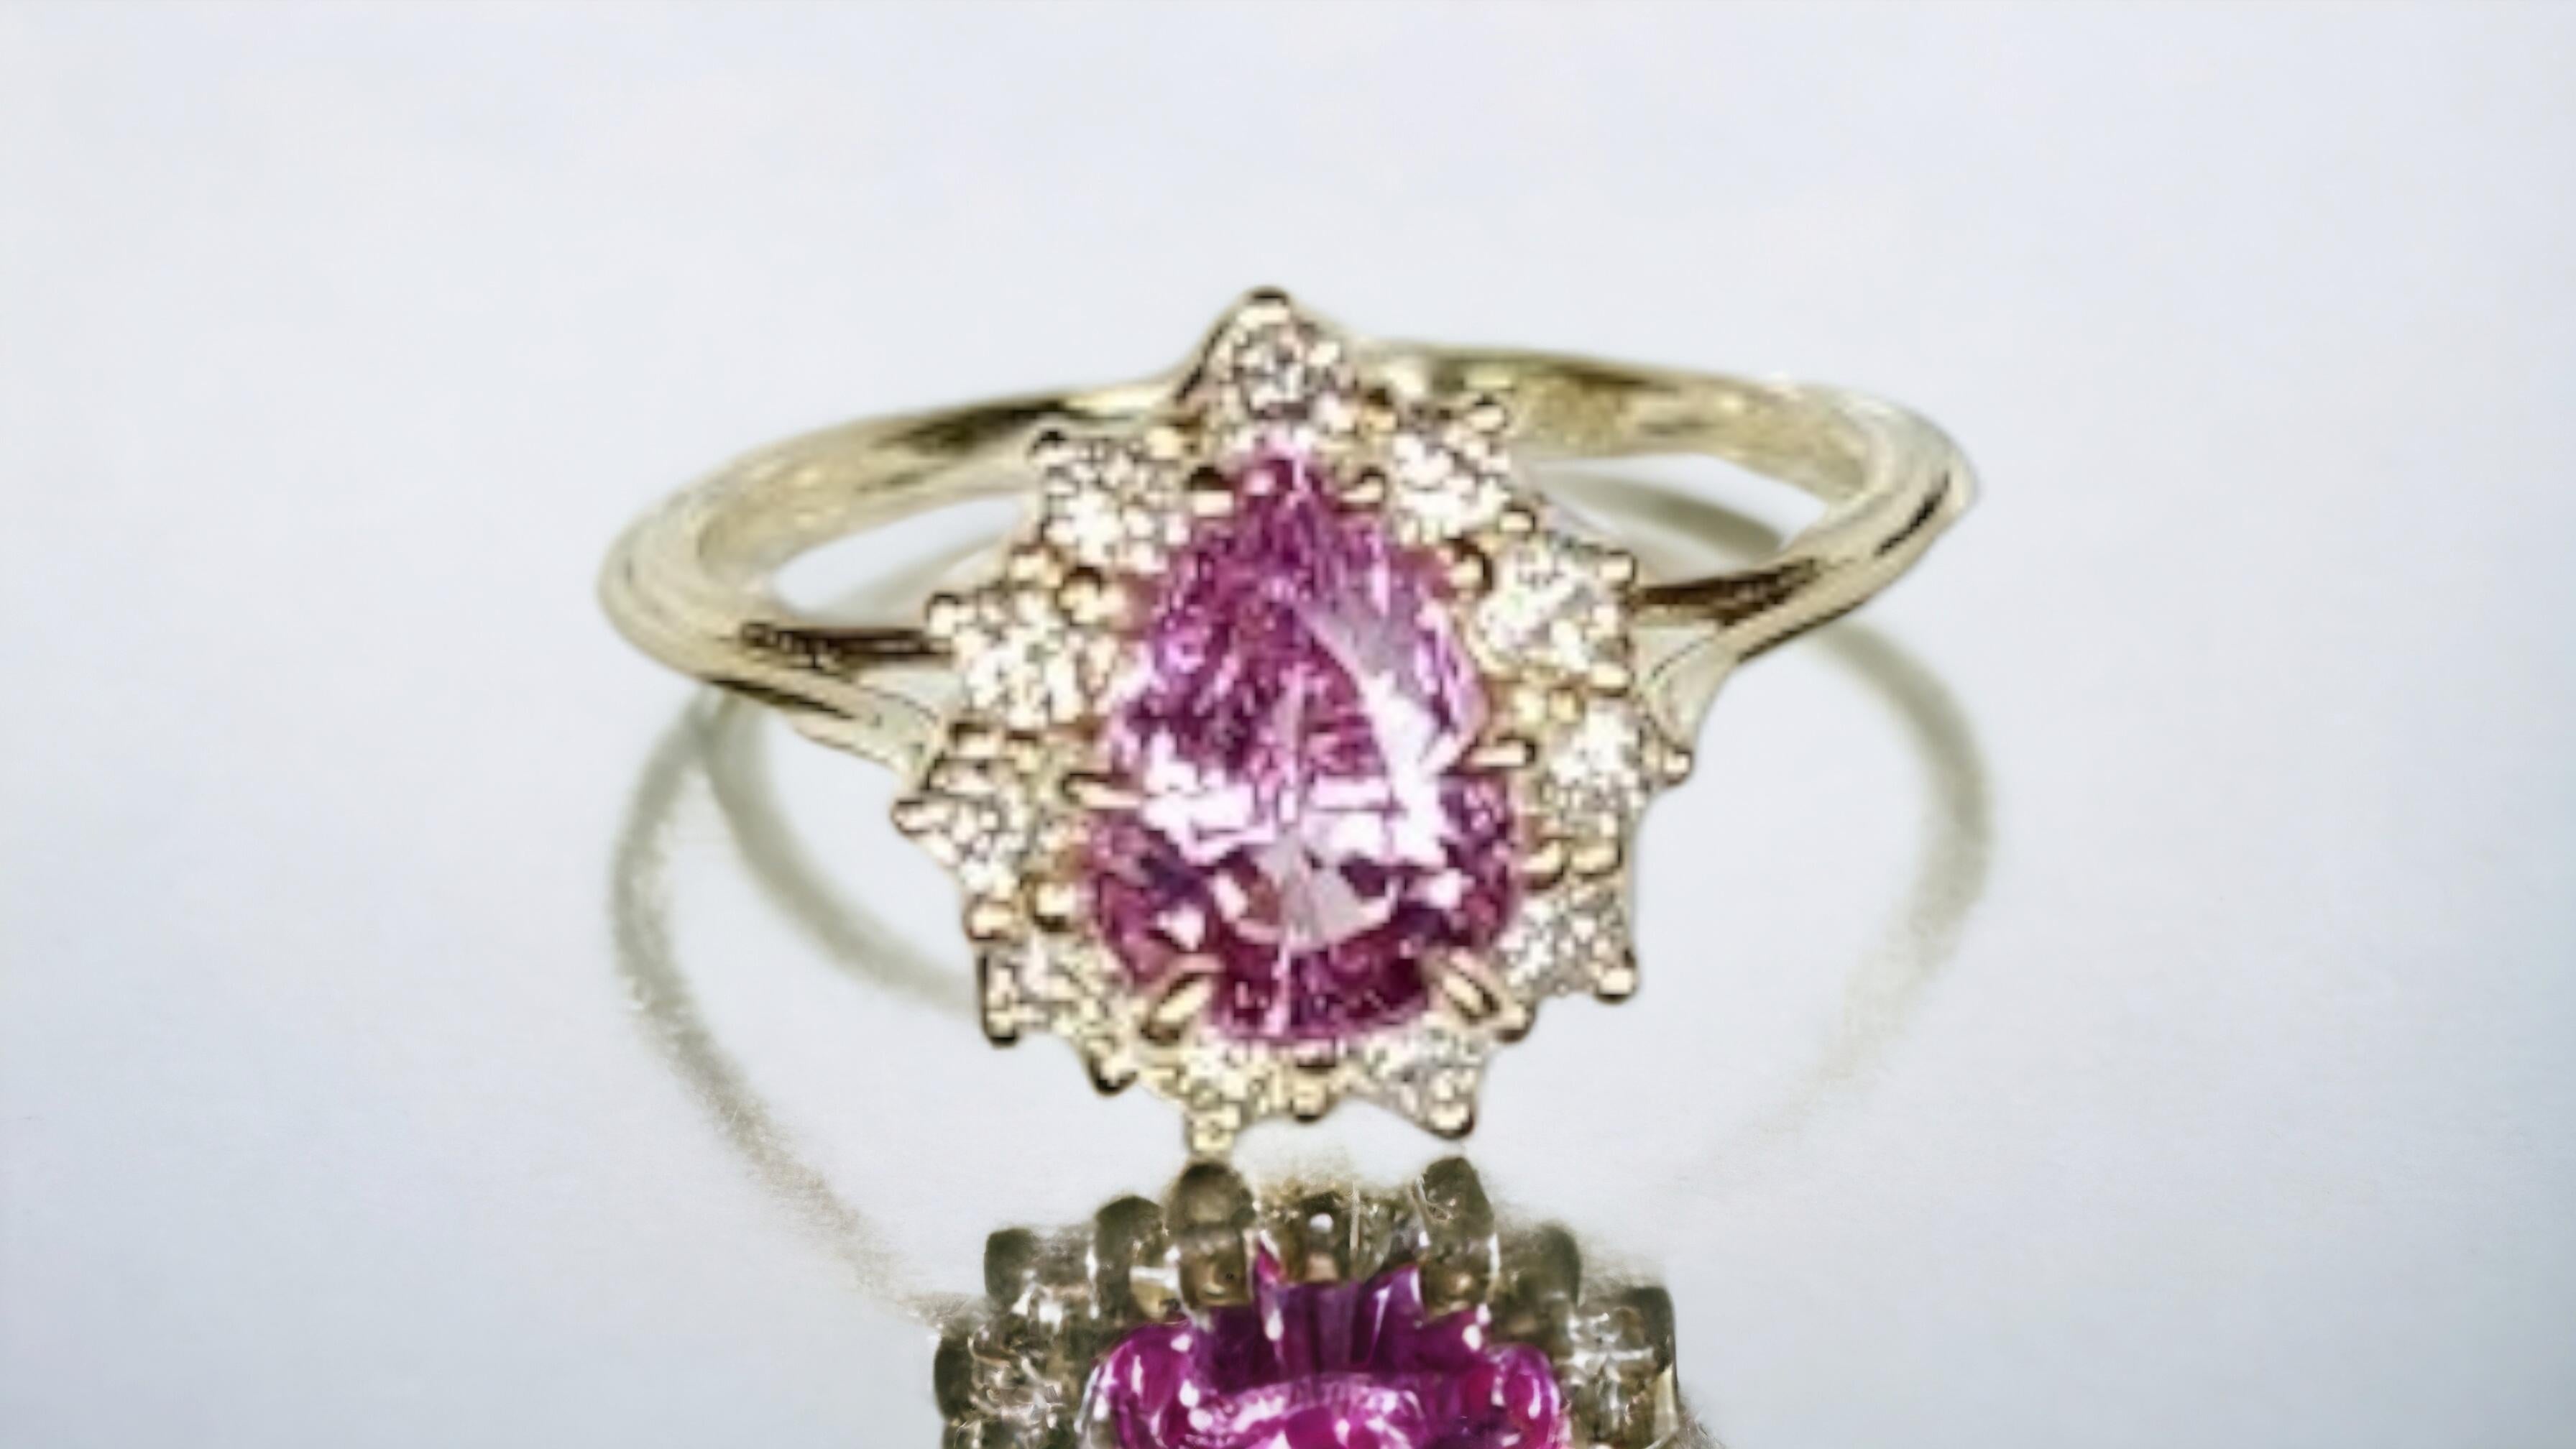 This beautiful ring from Lafrancee features a stunning natural unheated 1.37 CT. PERFECTLY CLEAN hot pink sapphire and surrounded by .28 ct ideal cut hearts and arrows sparkling diamonds set in 14K yellow gold. The pear-shaped sapphire is natural,